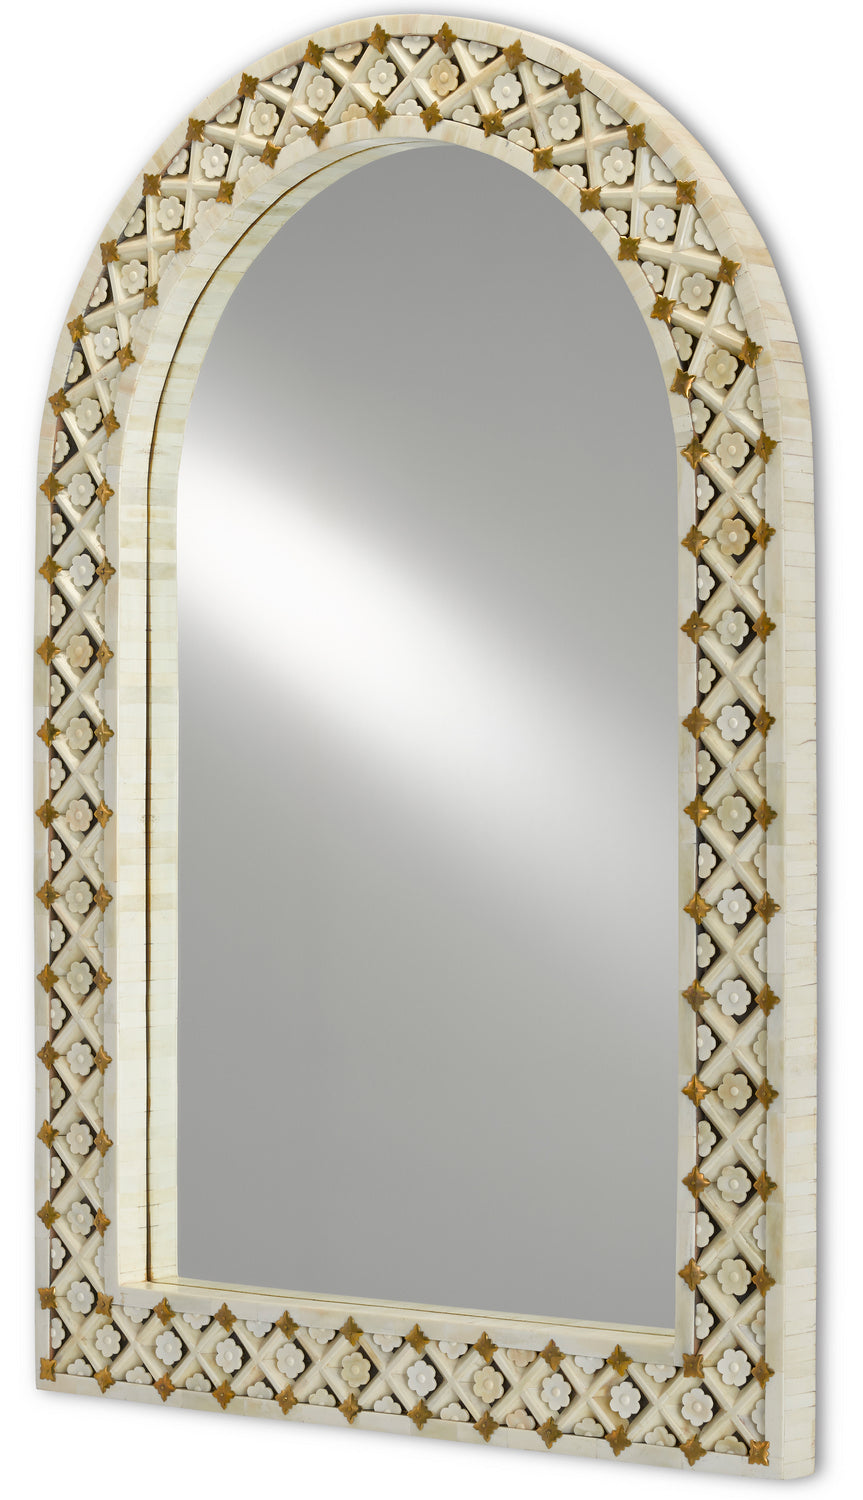 Mirror from the Ellaria collection in Natural Bone/Brass/Mirror finish